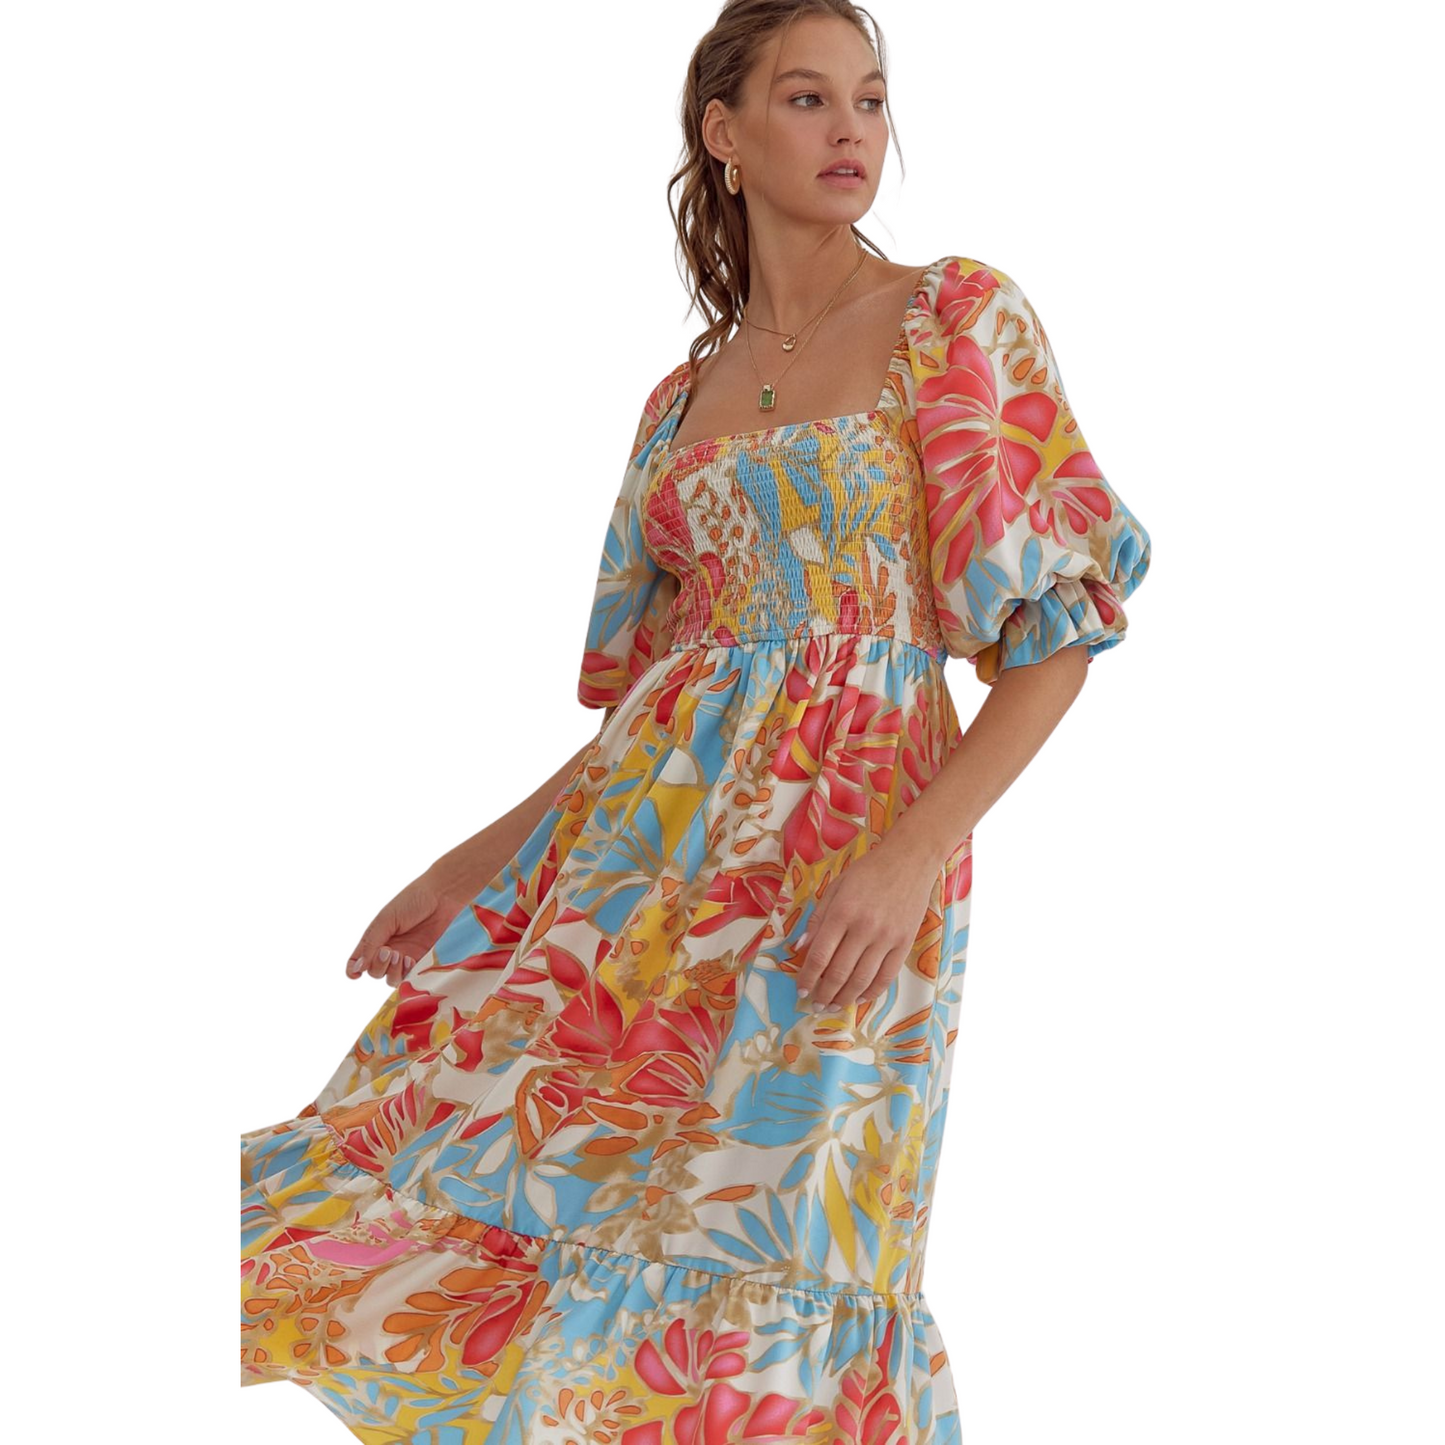 Add some color to your wardrobe with our Tropical Print Midi Dress. Featuring a square neck and half sleeves, this midi dress is perfect for any occasion. The smocking detail at the back ensures a comfortable and flattering fit. With elasticized sleeves and a lightweight, non-sheer fabric, you'll look and feel great all day long.